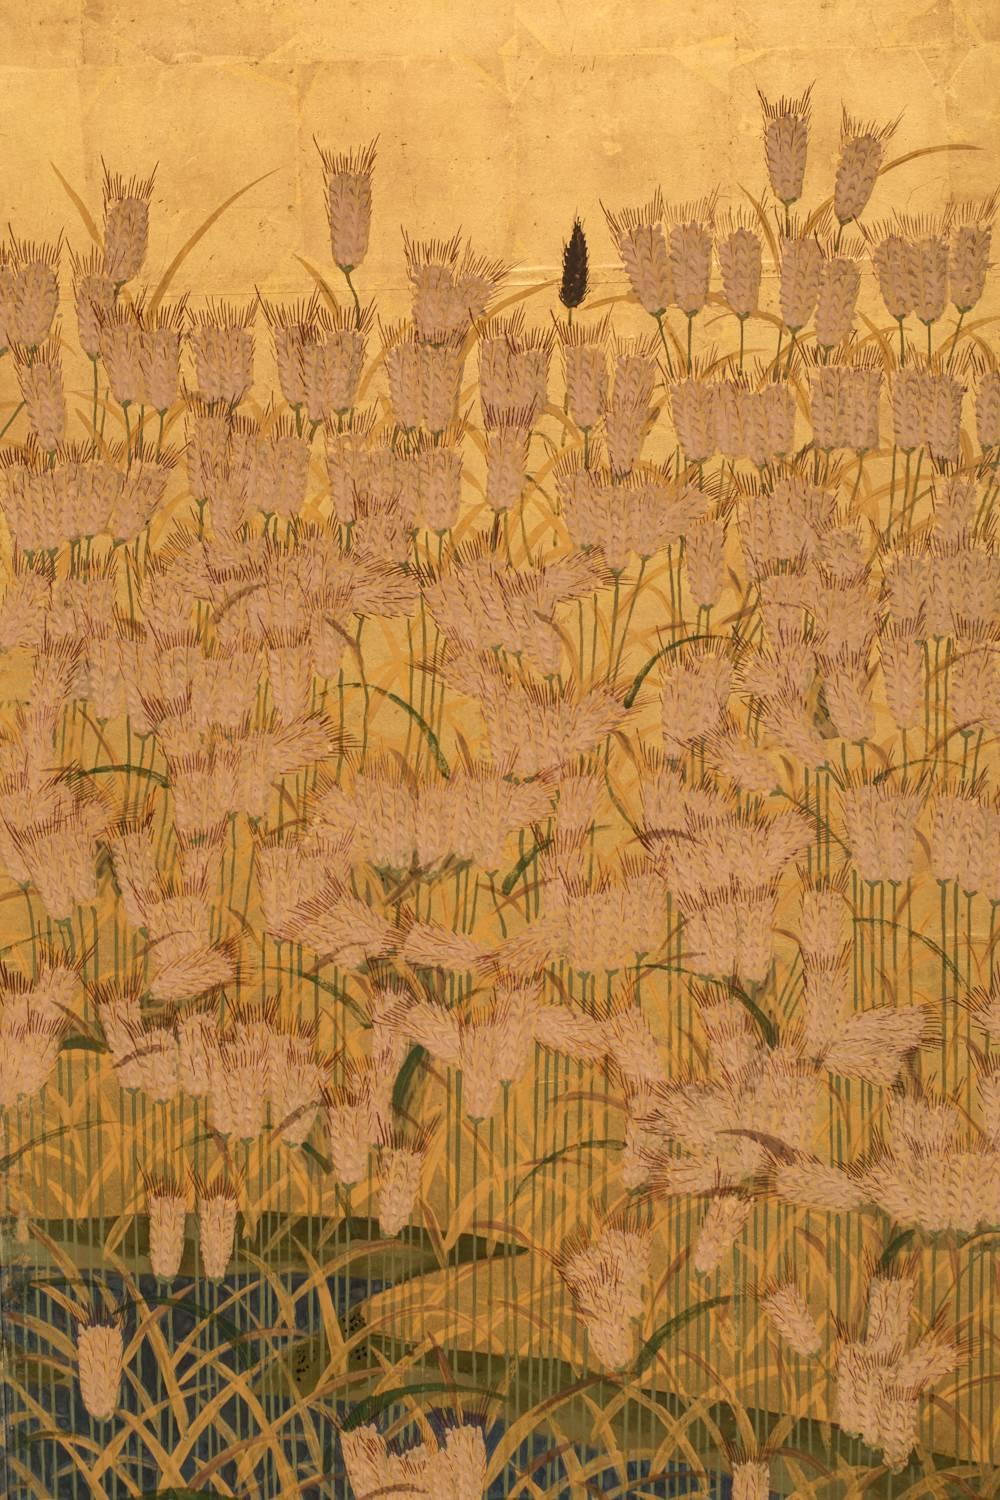 19th Century Japanese Six-Panel Screen: Field of Wheat by River's Edge